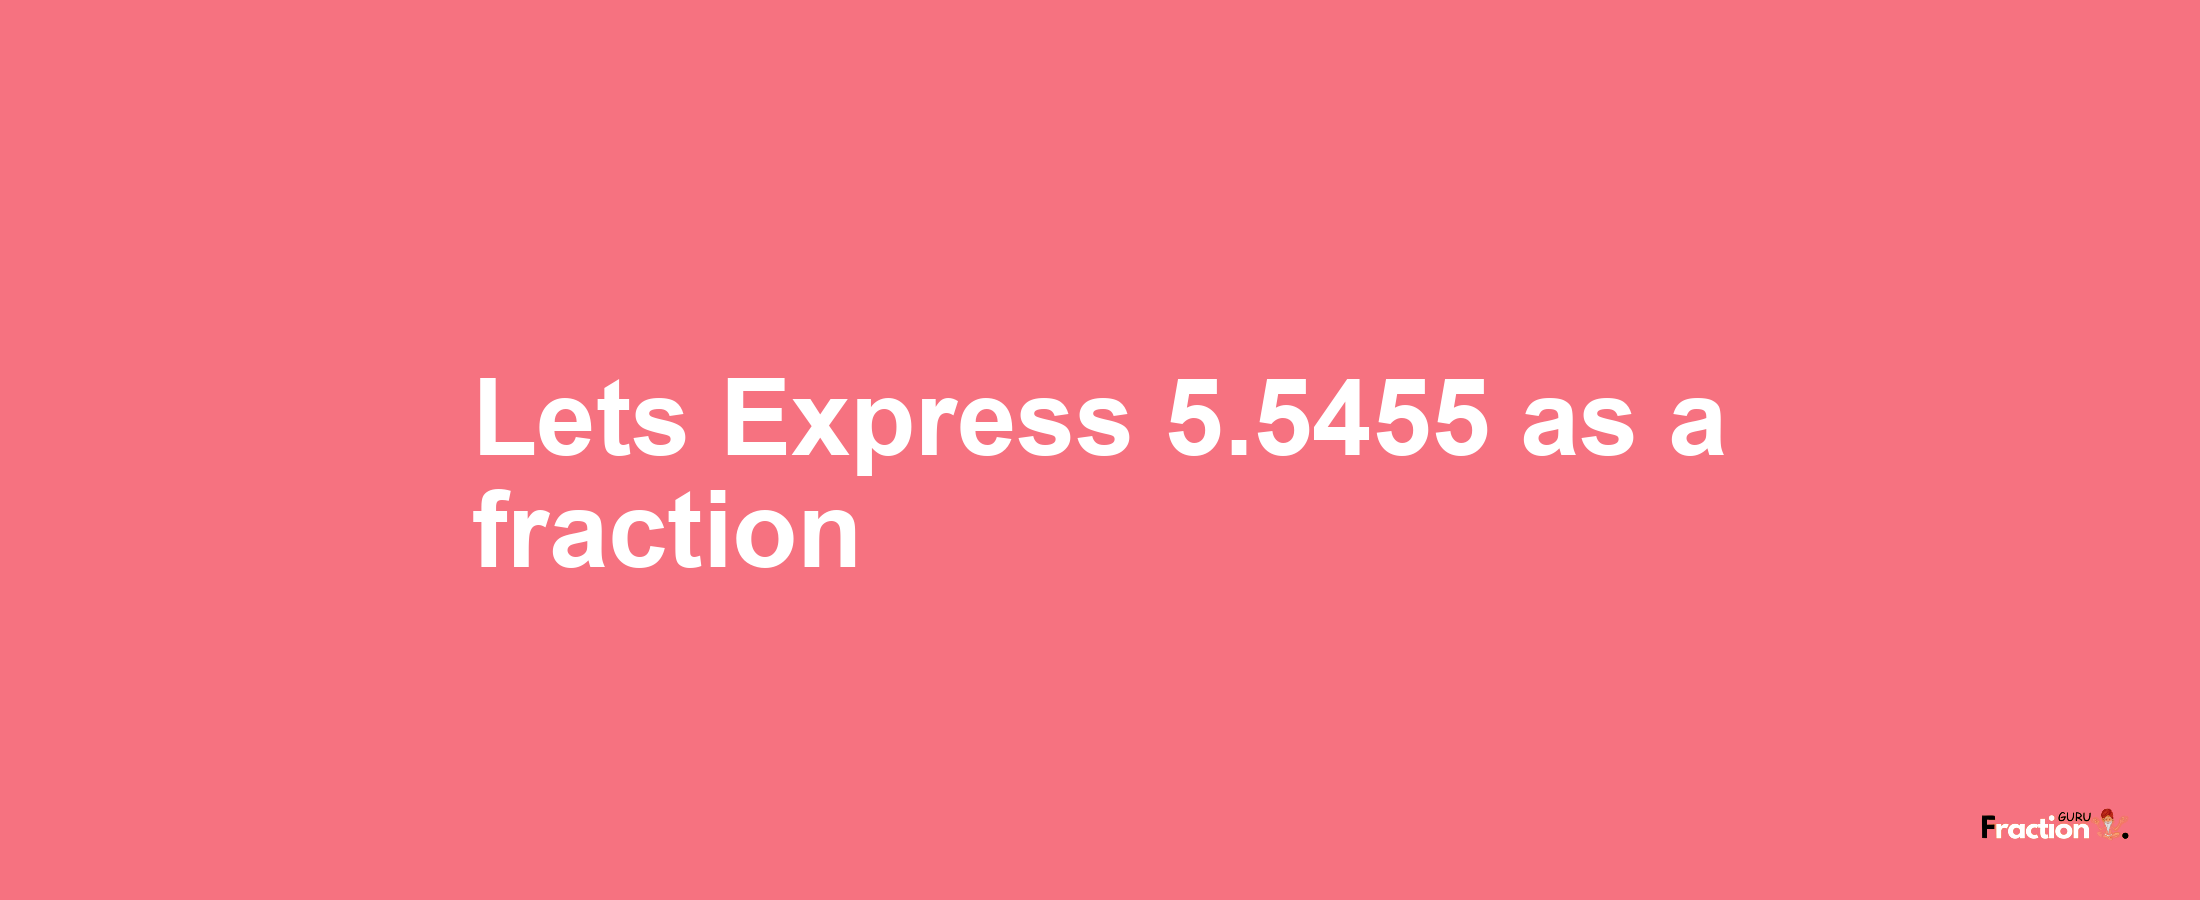 Lets Express 5.5455 as afraction